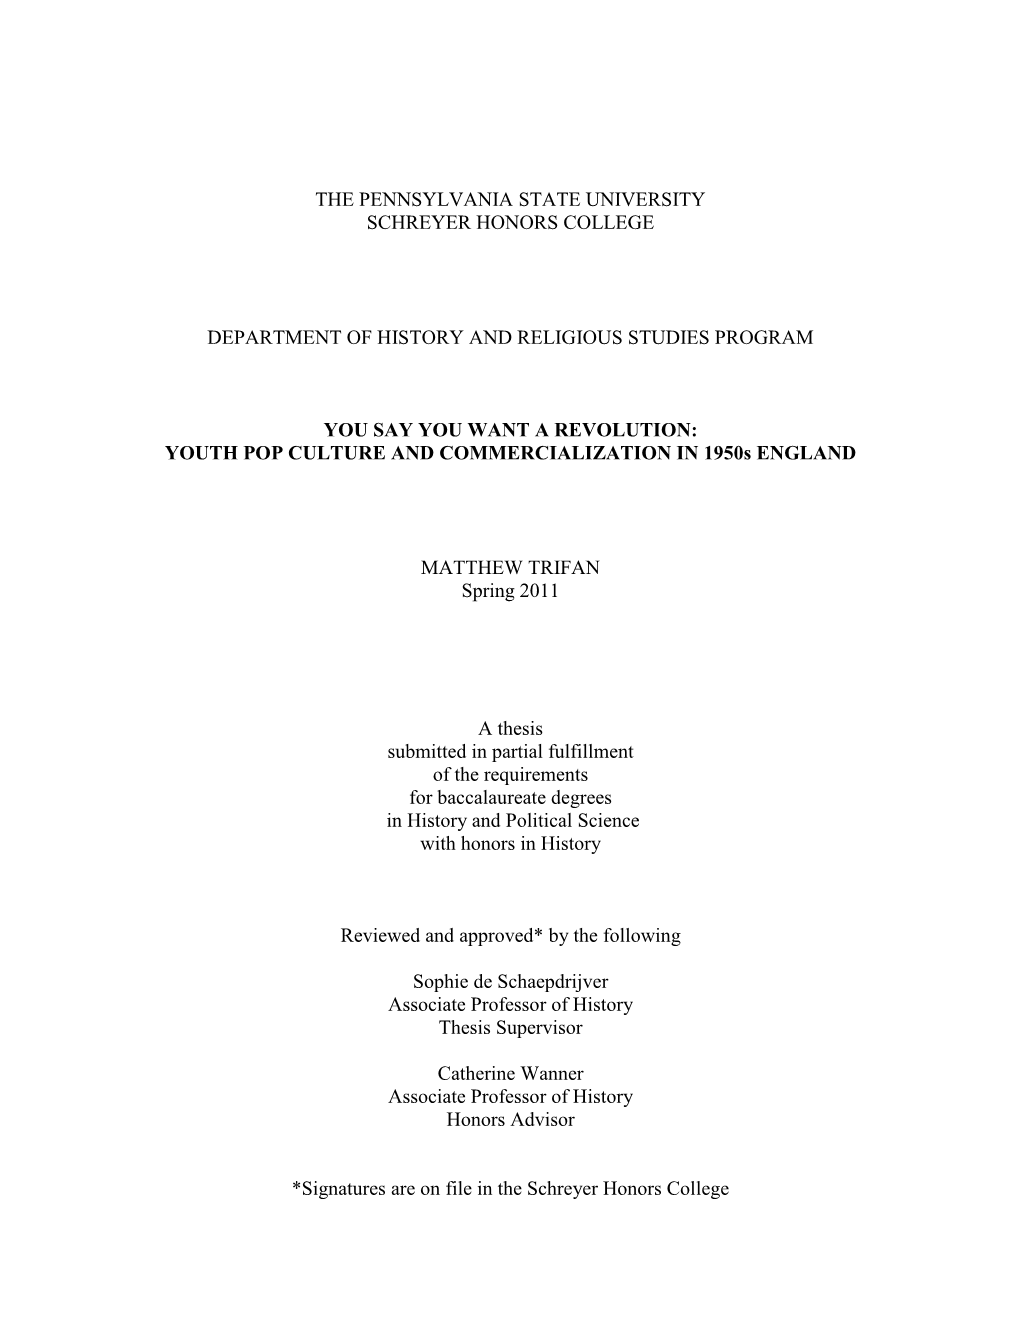 Open HONORS THESIS FINAL VERSION.Pdf